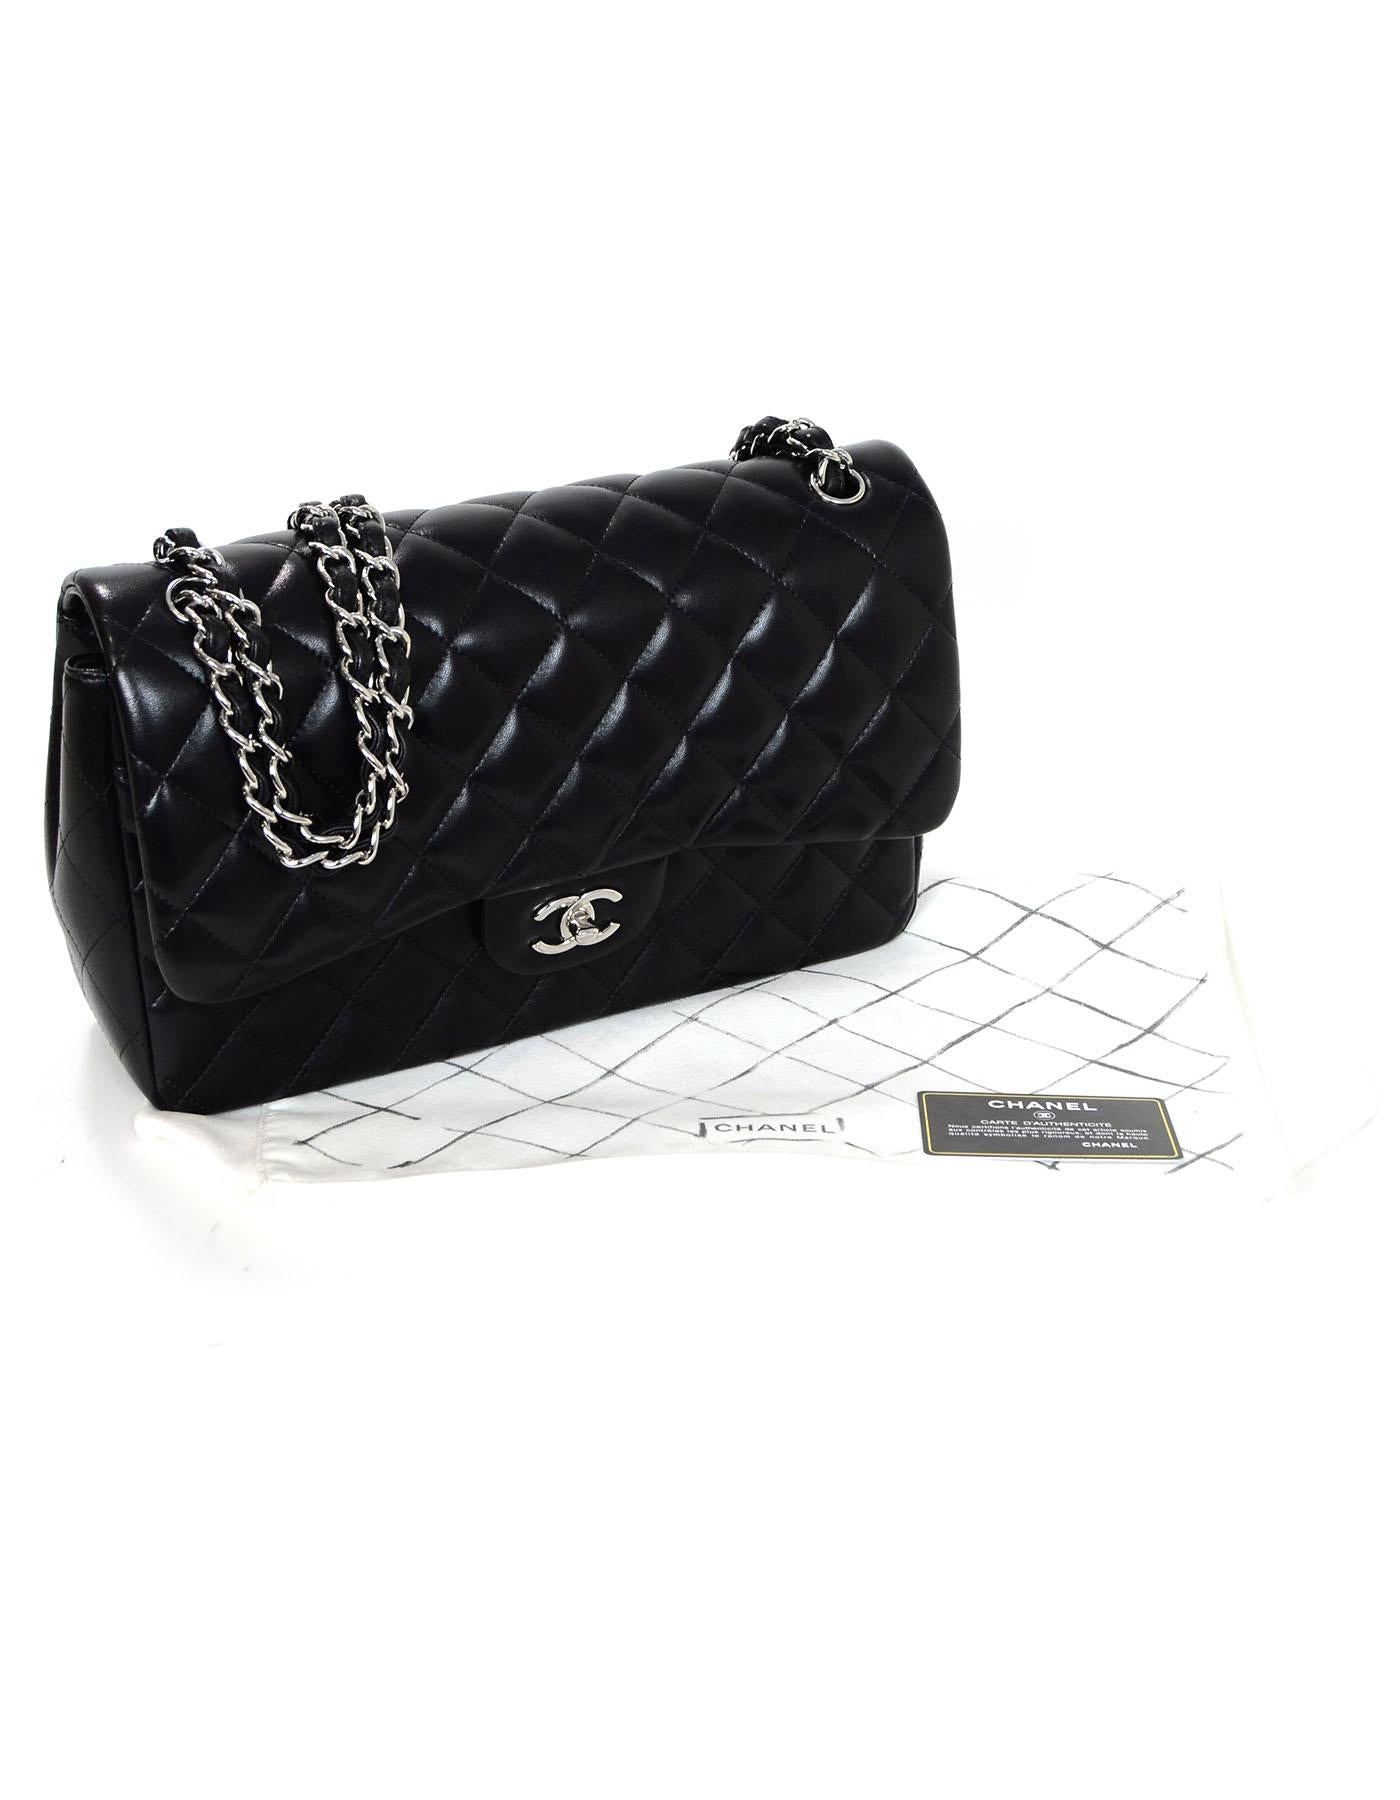 Chanel Black Lambskin Leather Quilted Double Flap Classic Jumbo Bag SHW 6